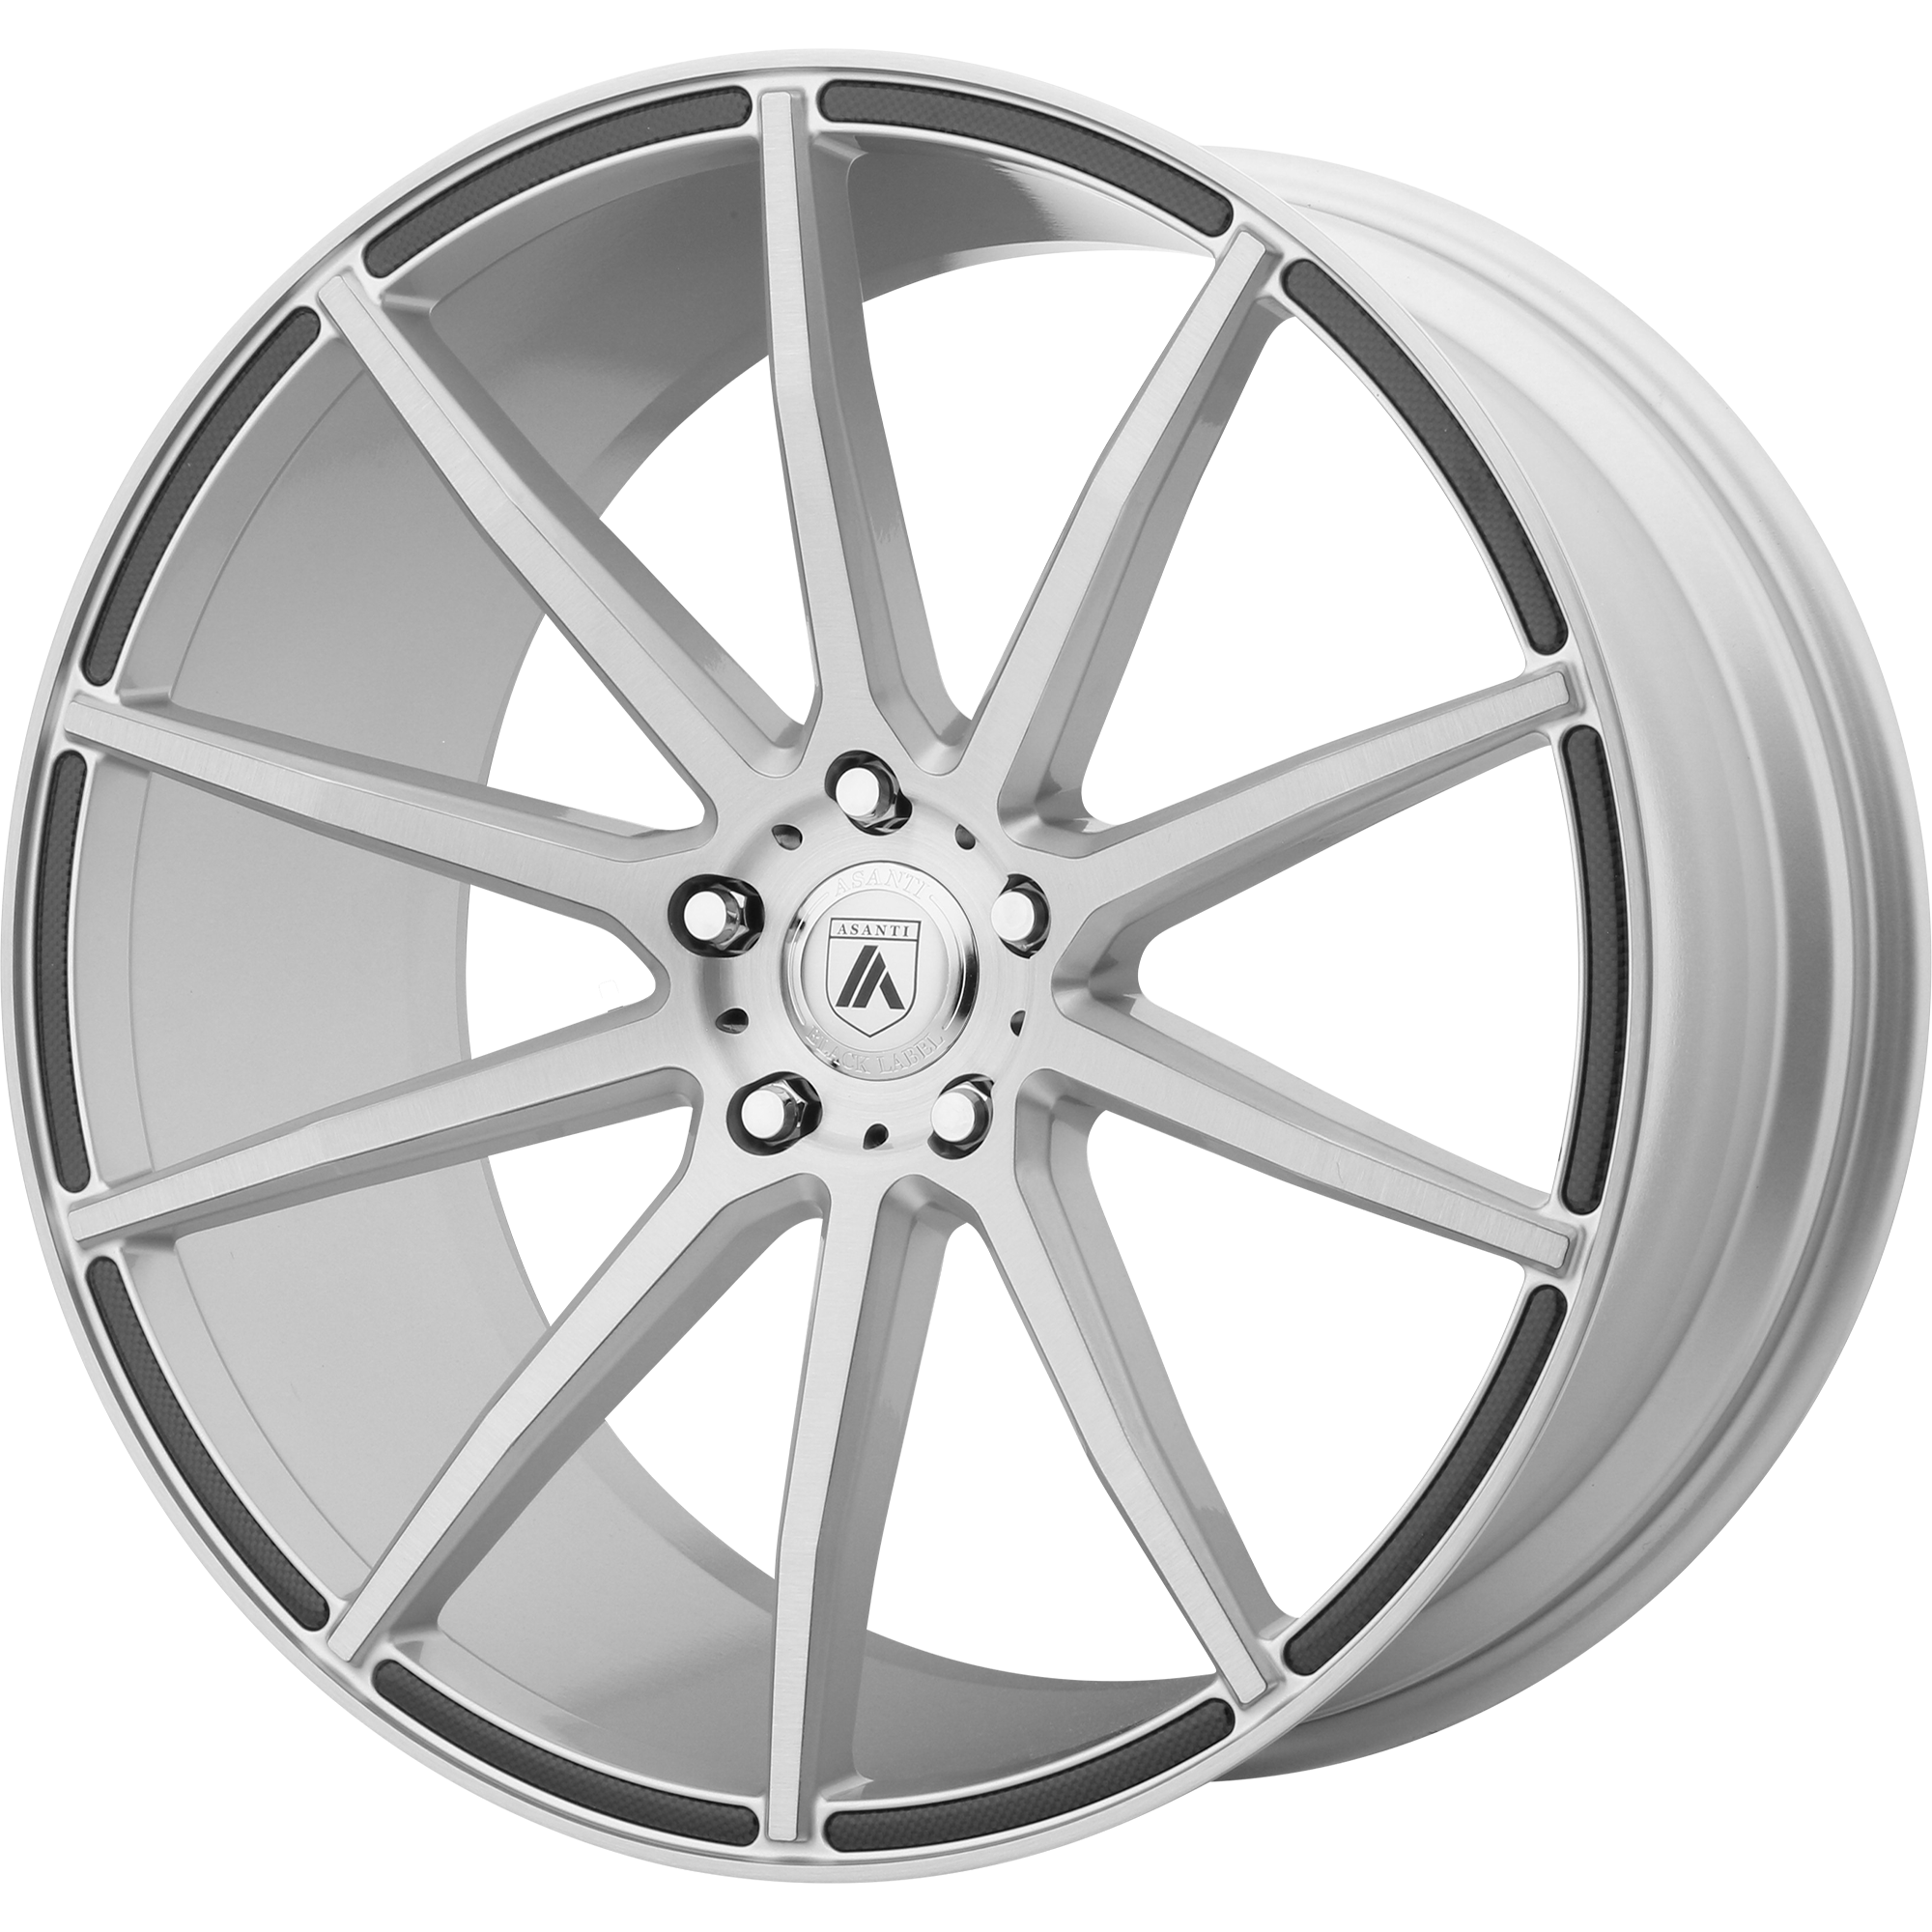 ARIES 22x9 5x115.00 BRUSHED SILVER (15 mm) - Tires and Engine Performance